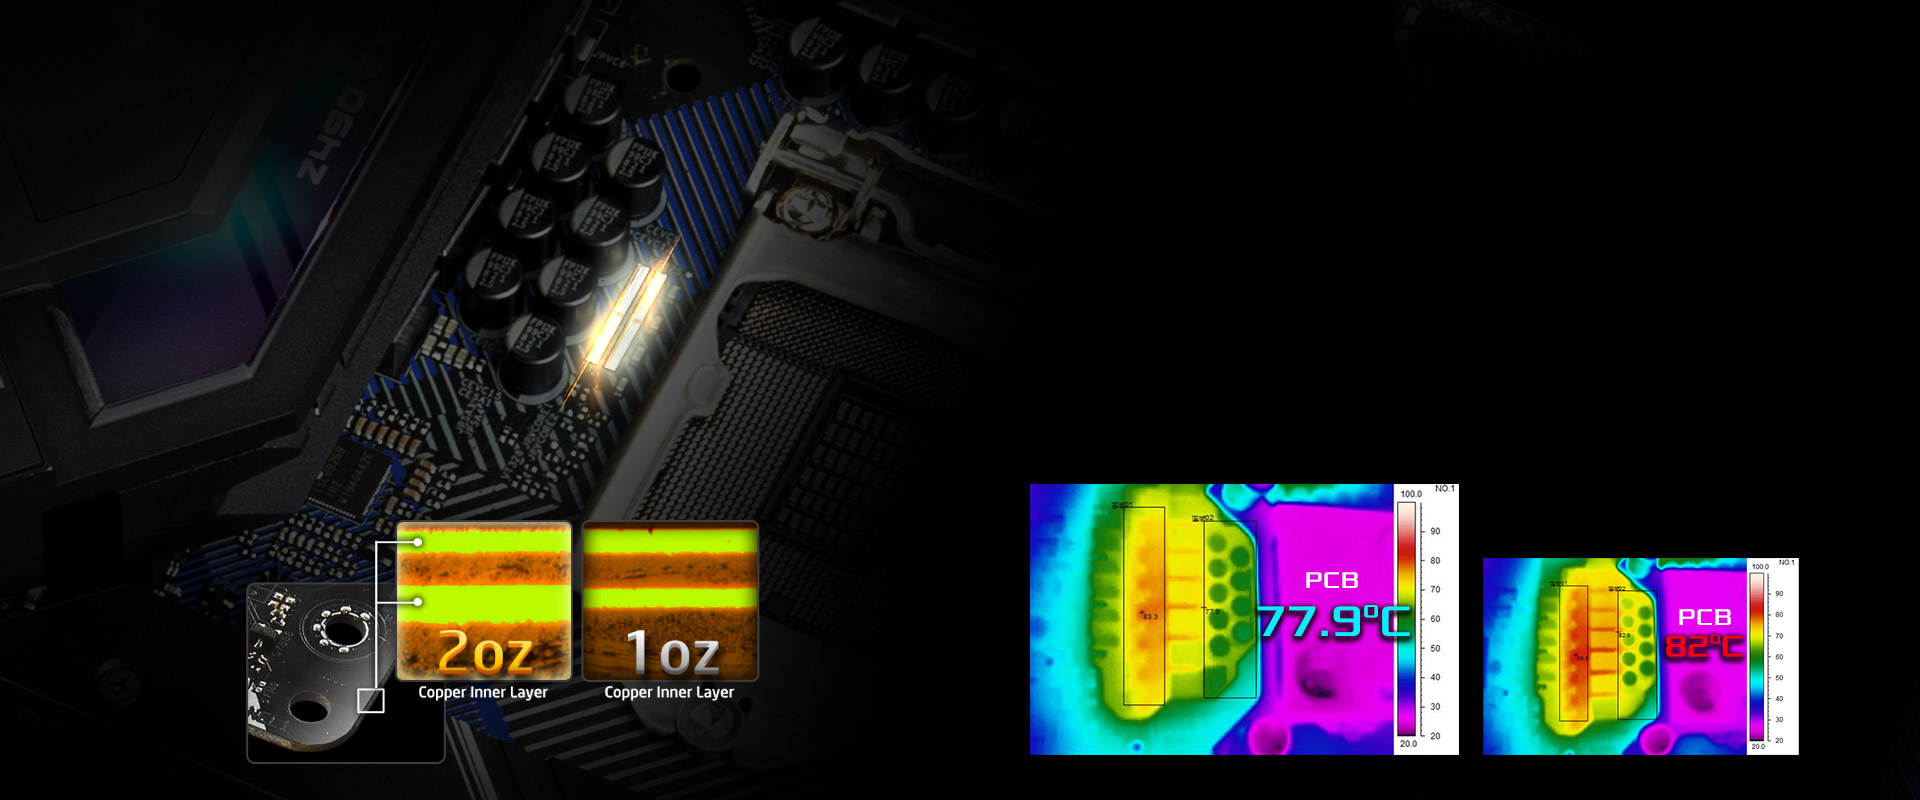 Heat Dissipating of the motherboard